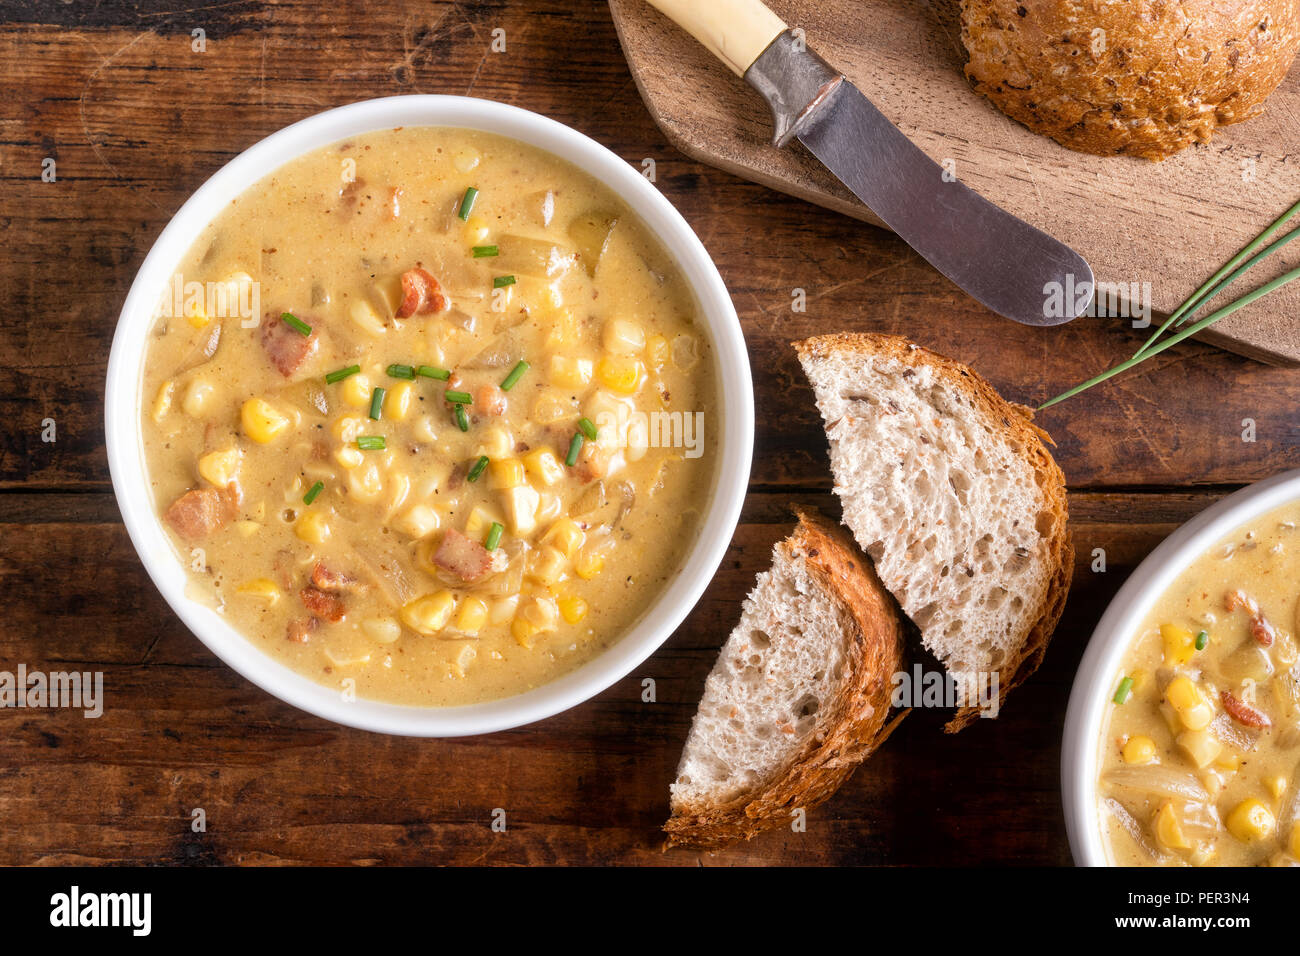 A bowl of delicious homemade bacon corn chowder with whole grain bread on a rustic wood table top. Stock Photo